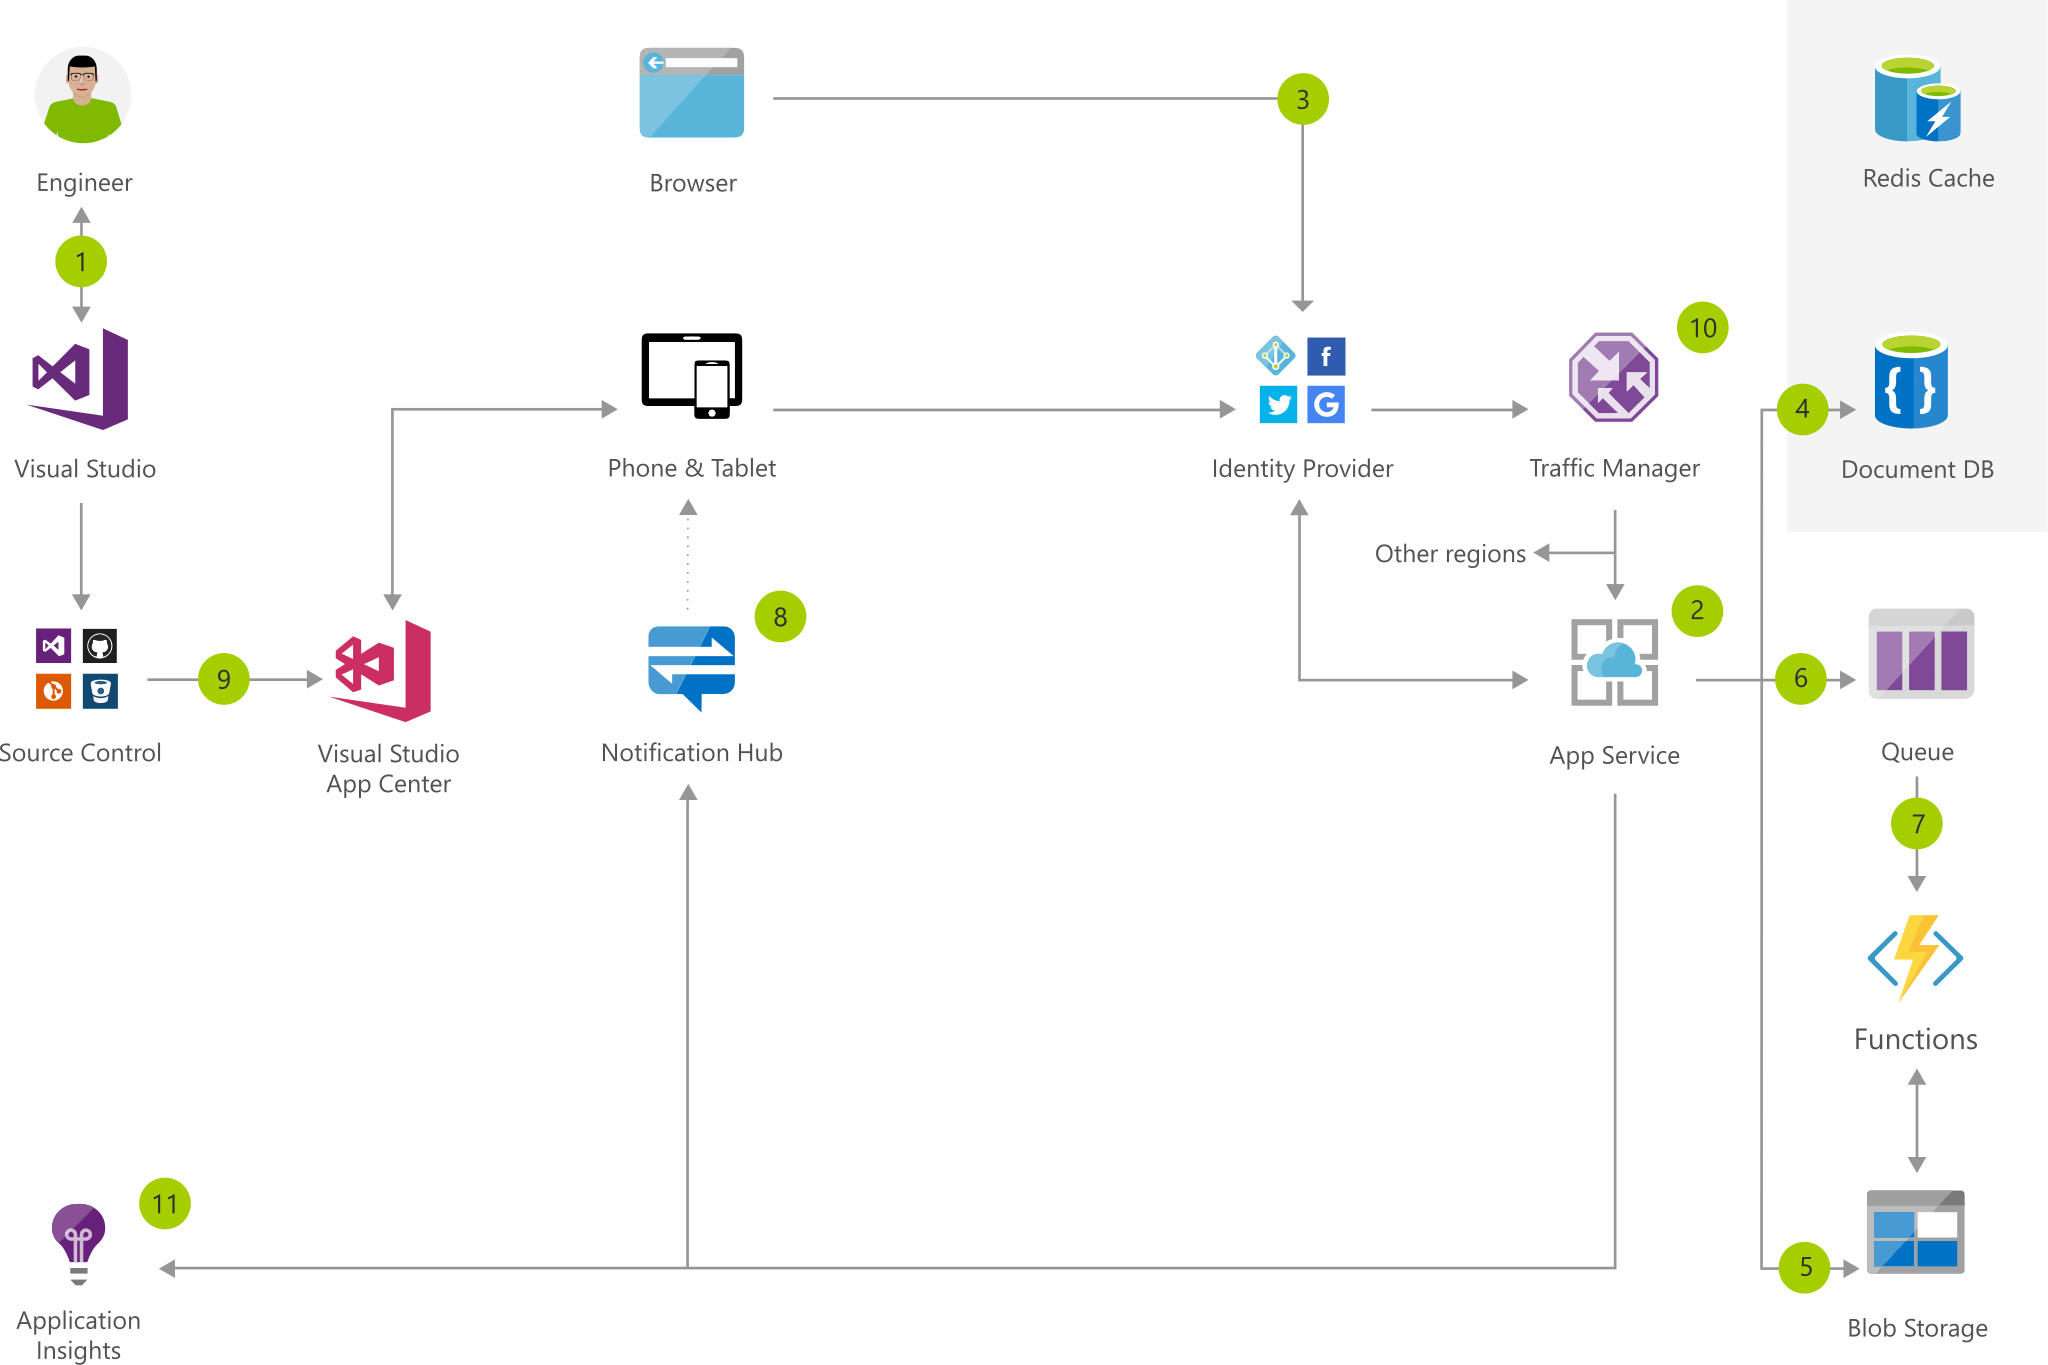 Architecture diagram shows the route from the Engineer to Application Insights.